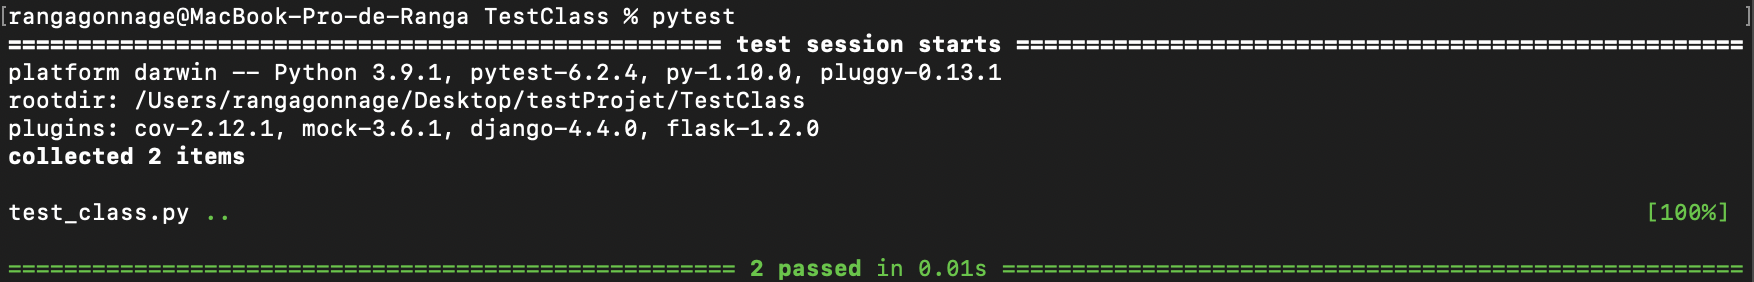 Once the pytest command is run on the terminal, the two tests from the test class are executed.